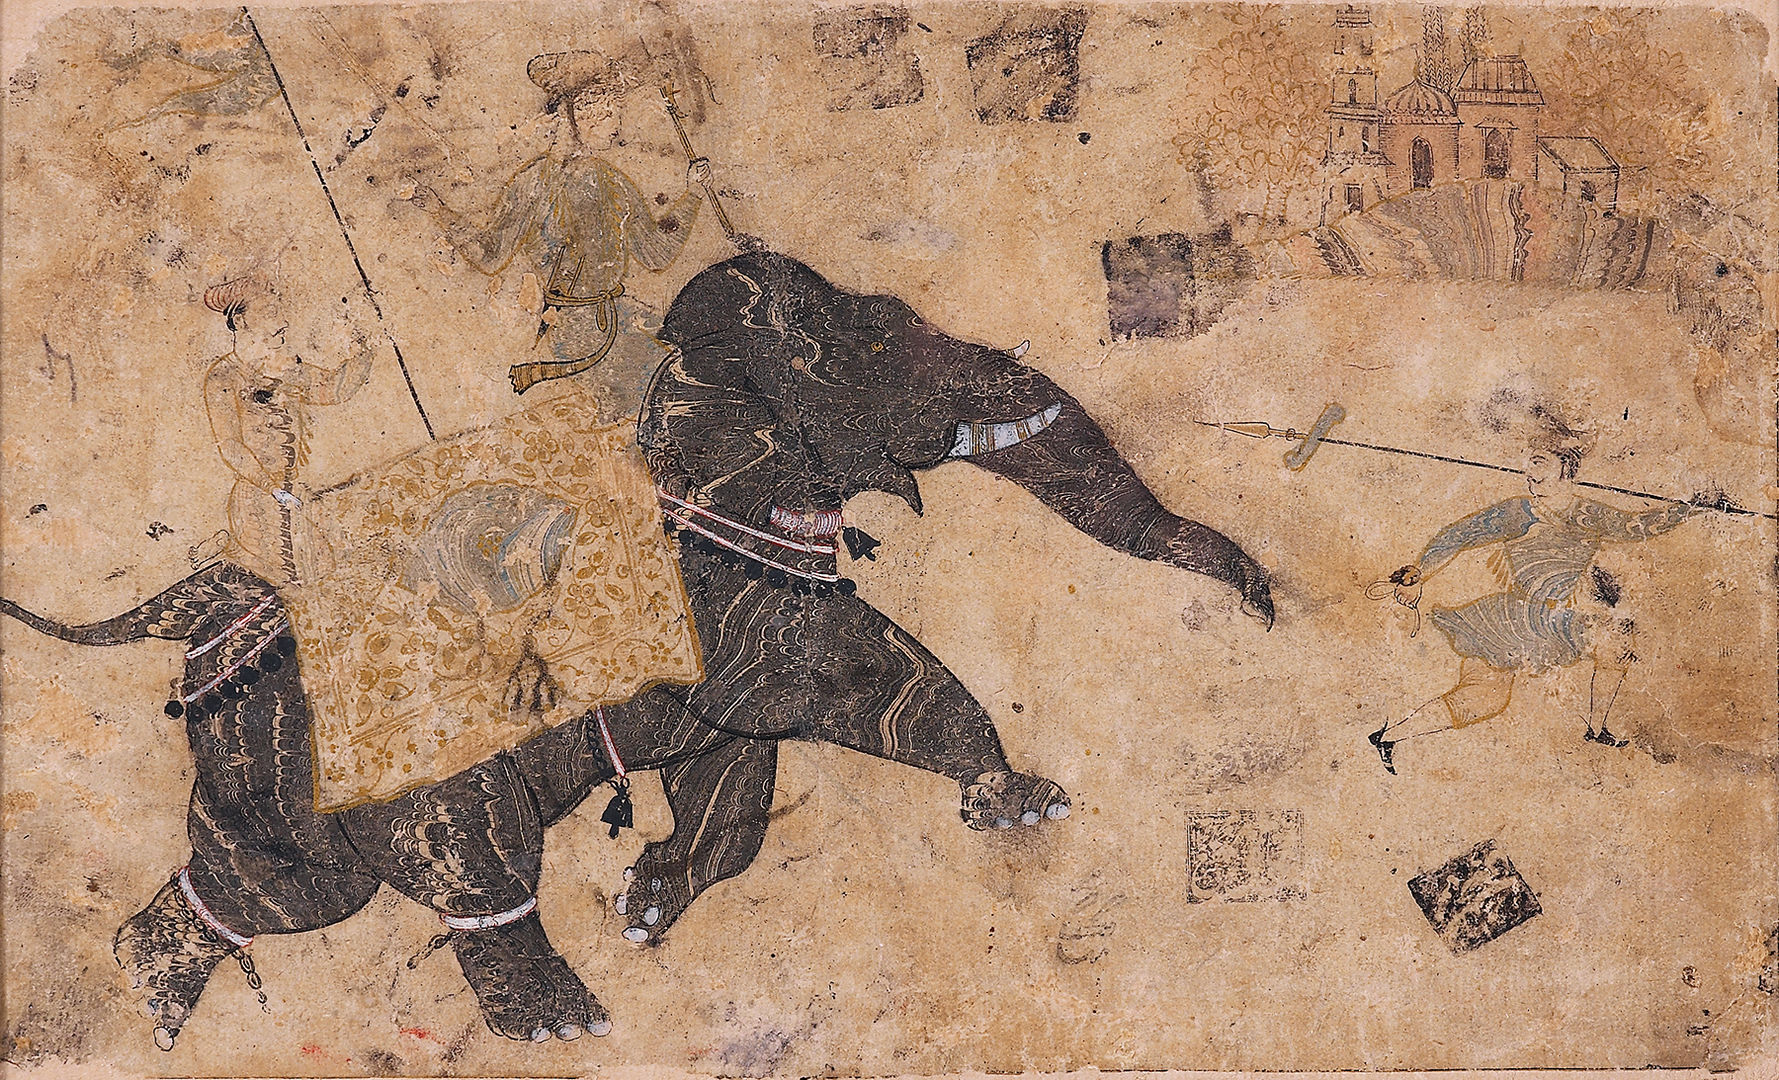 painting of an elephant with marbled skin